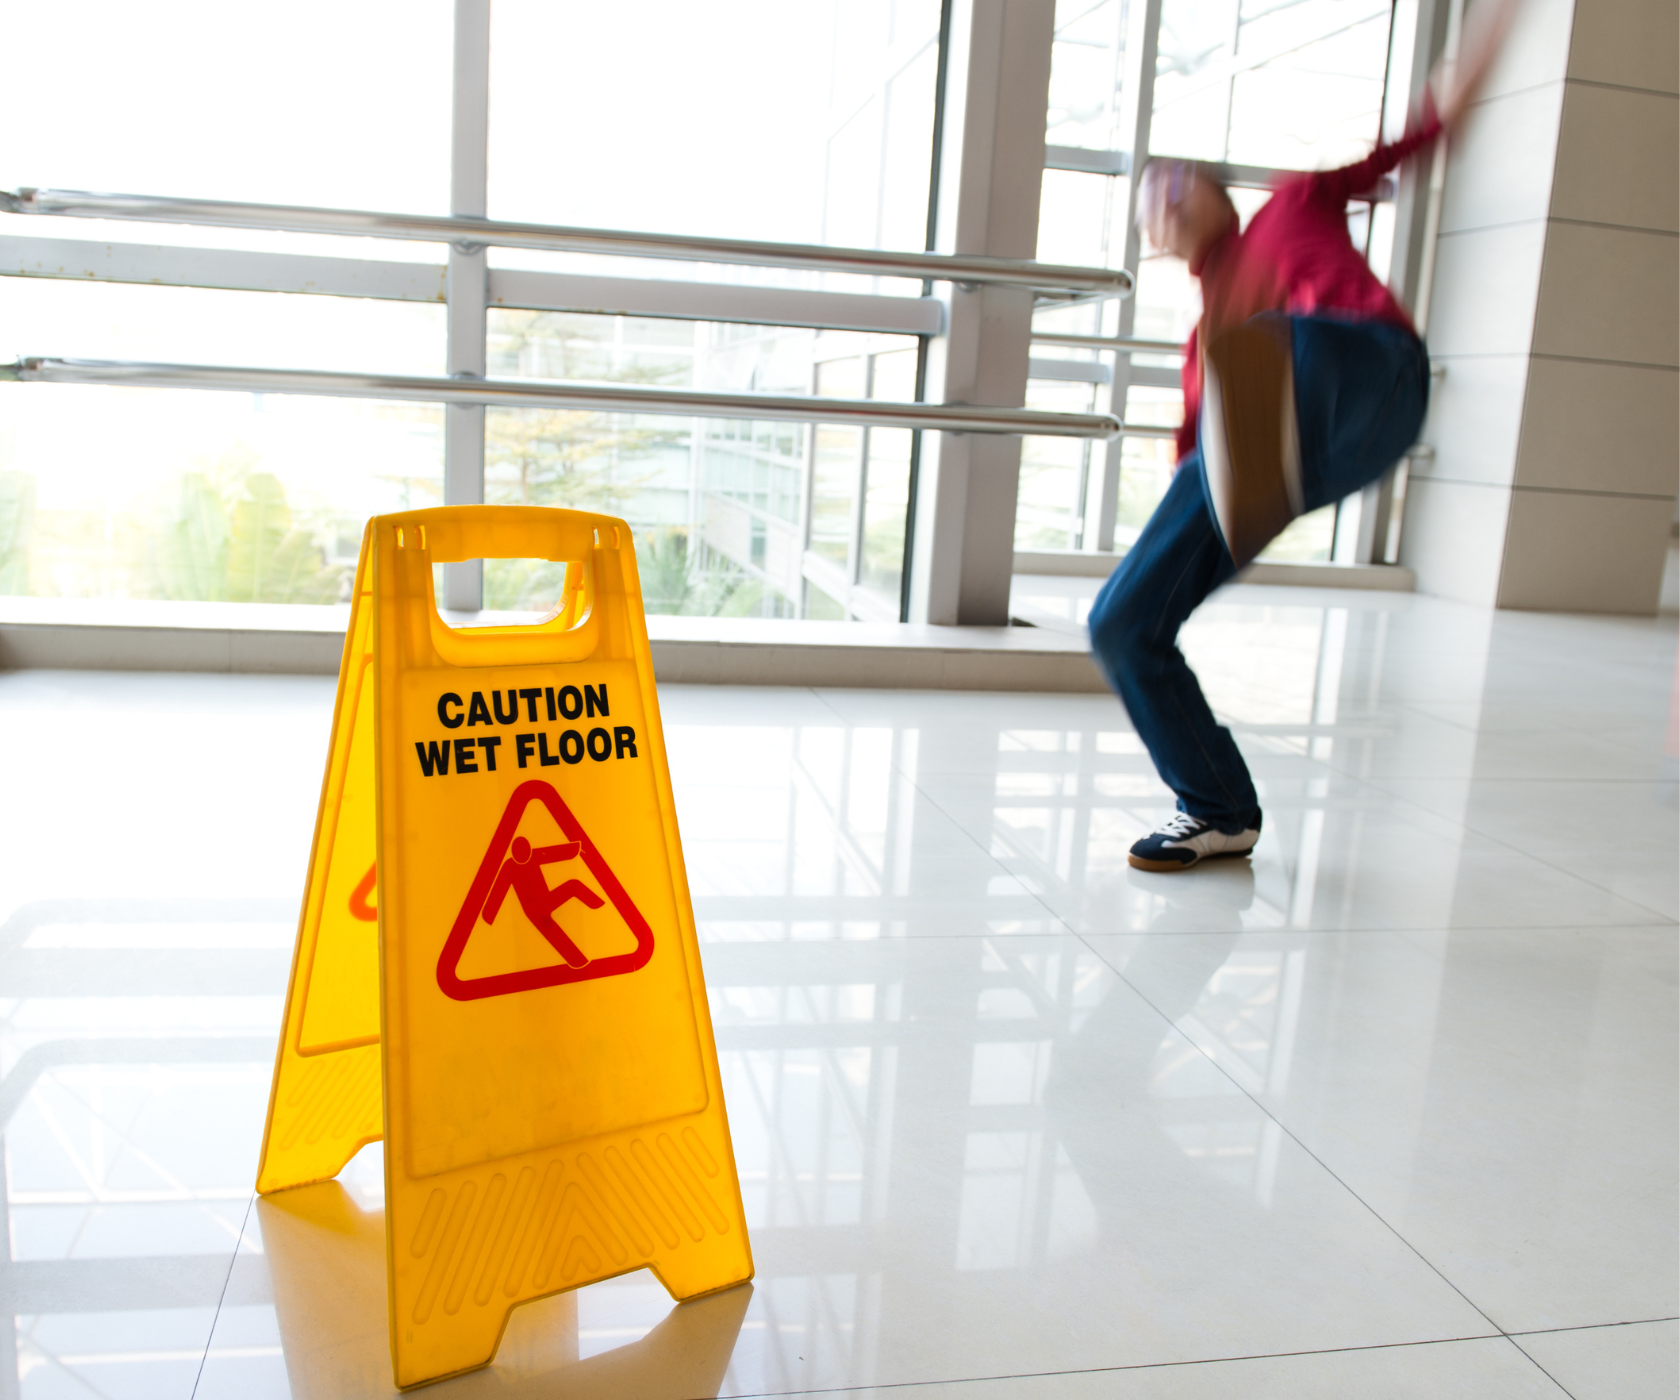 Man slipping over and a wet floor sign.